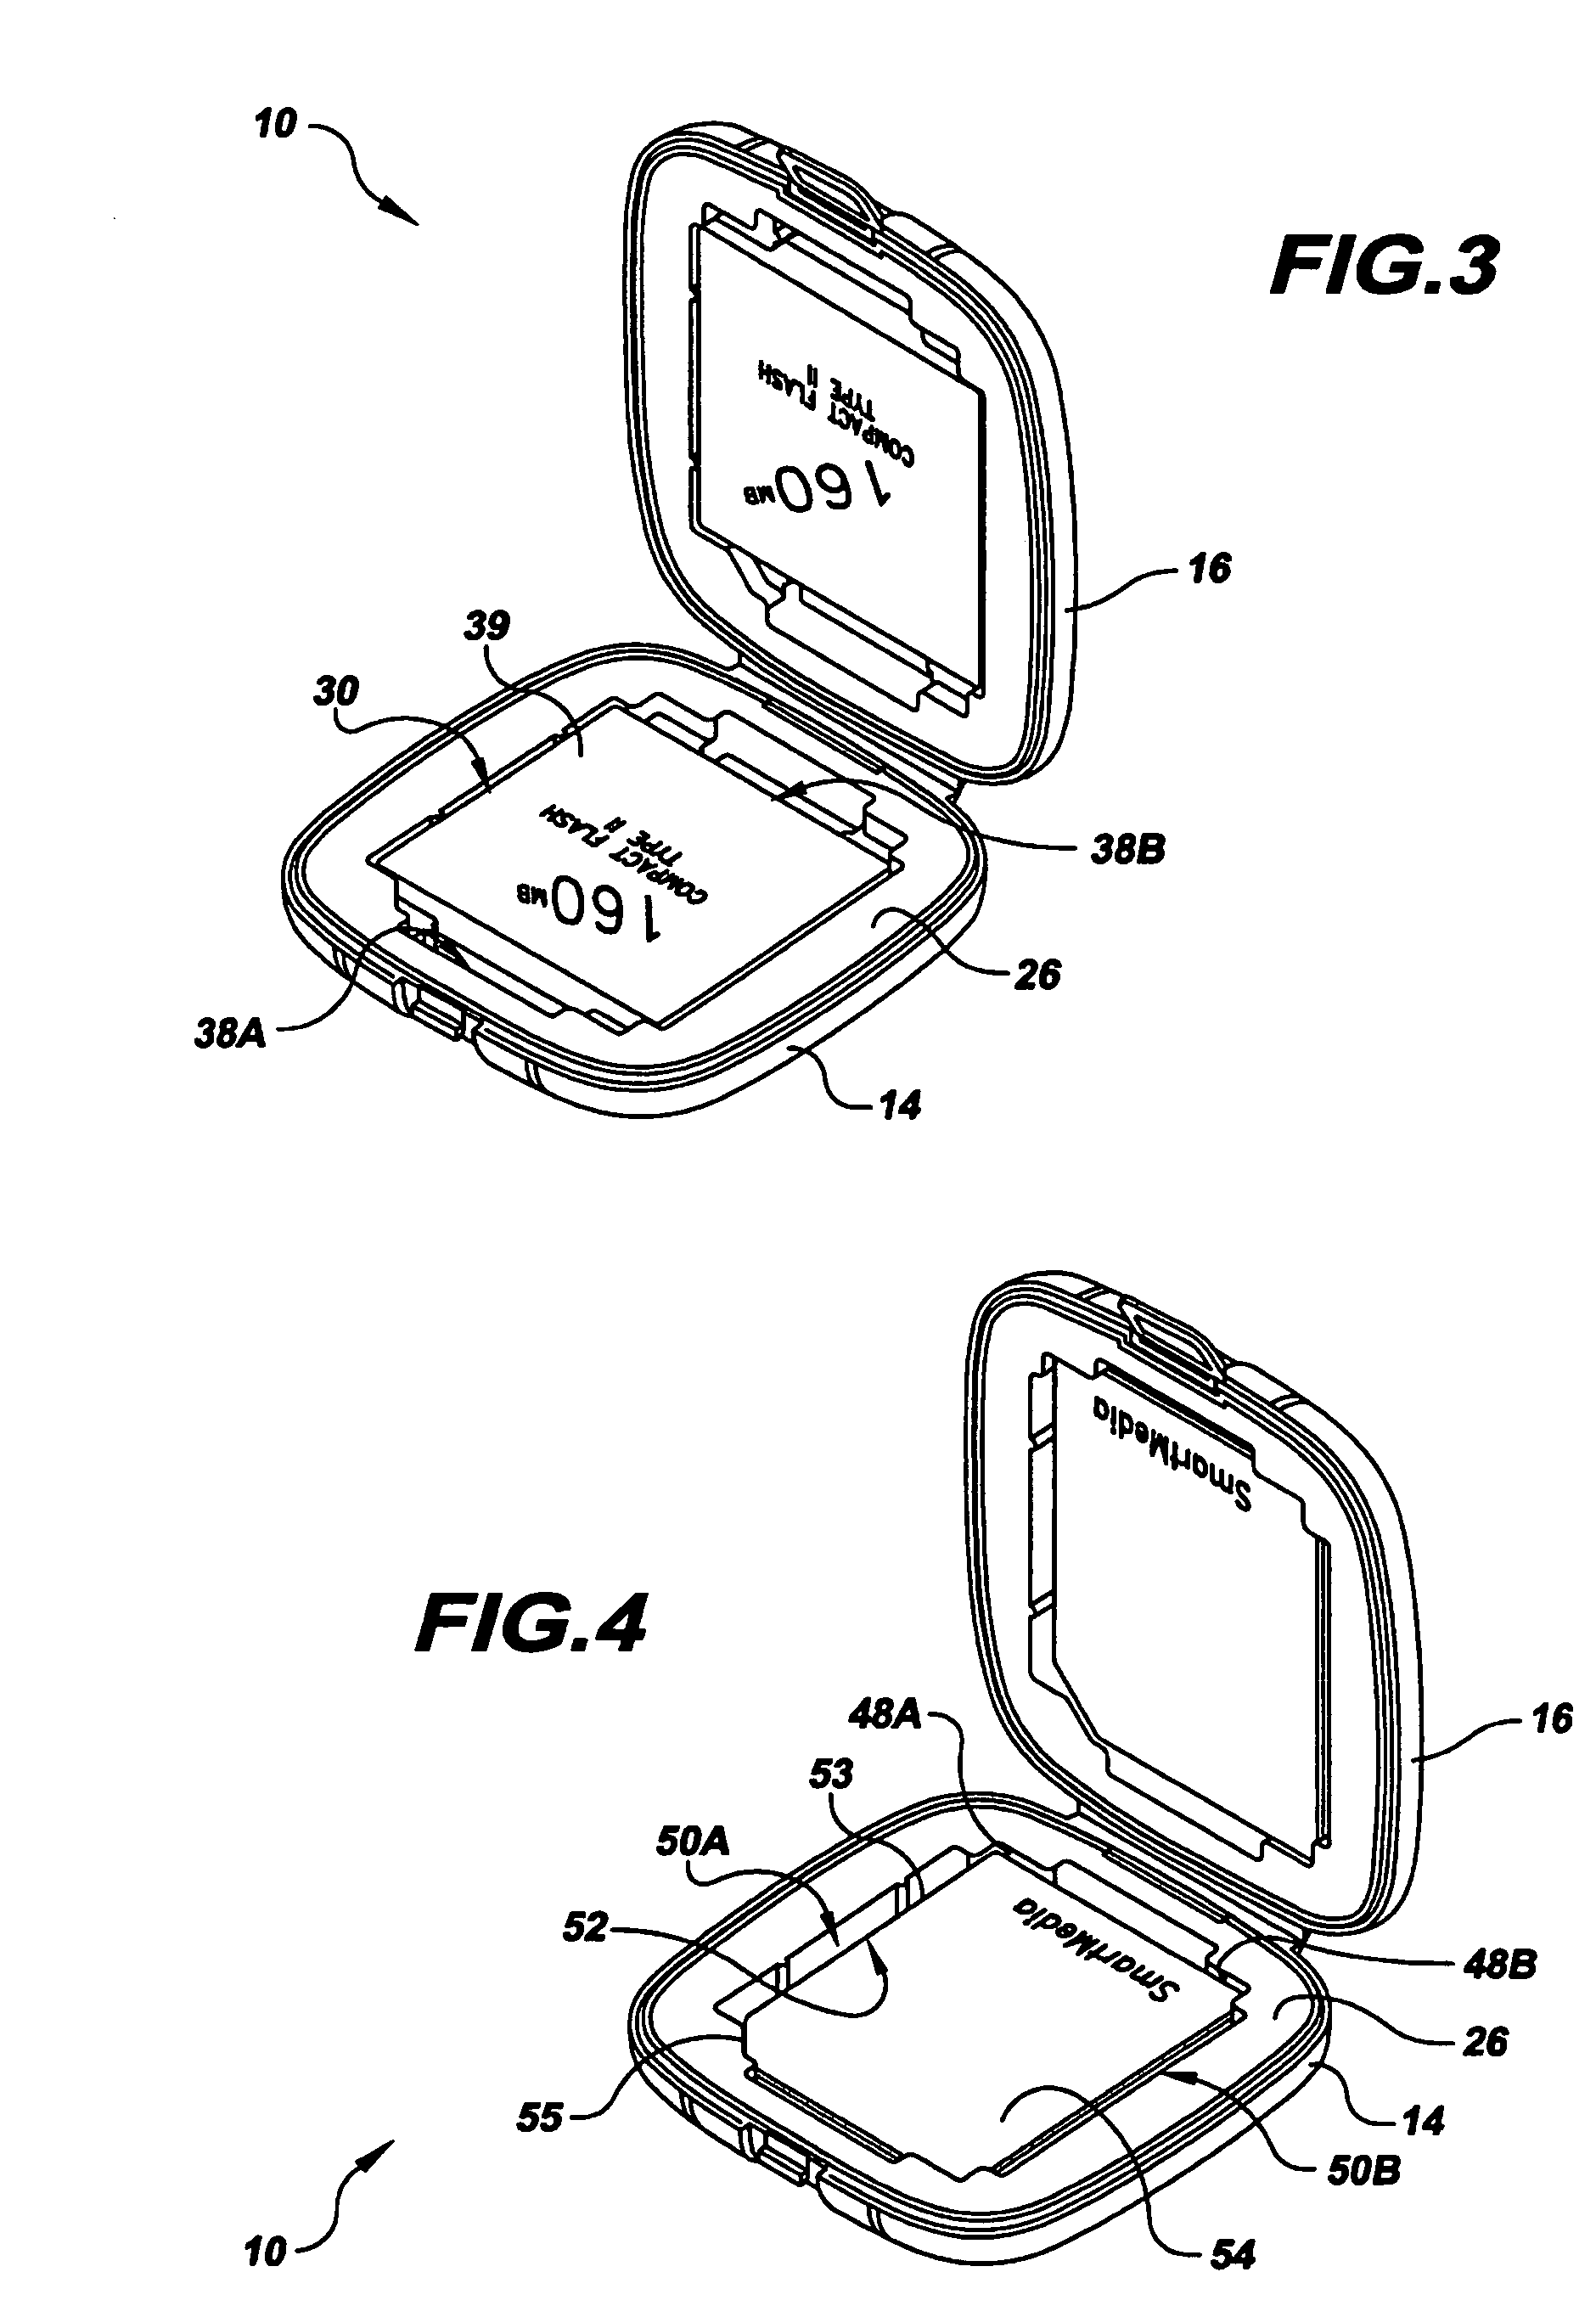 Protective case for a plurality of different sized memory cards